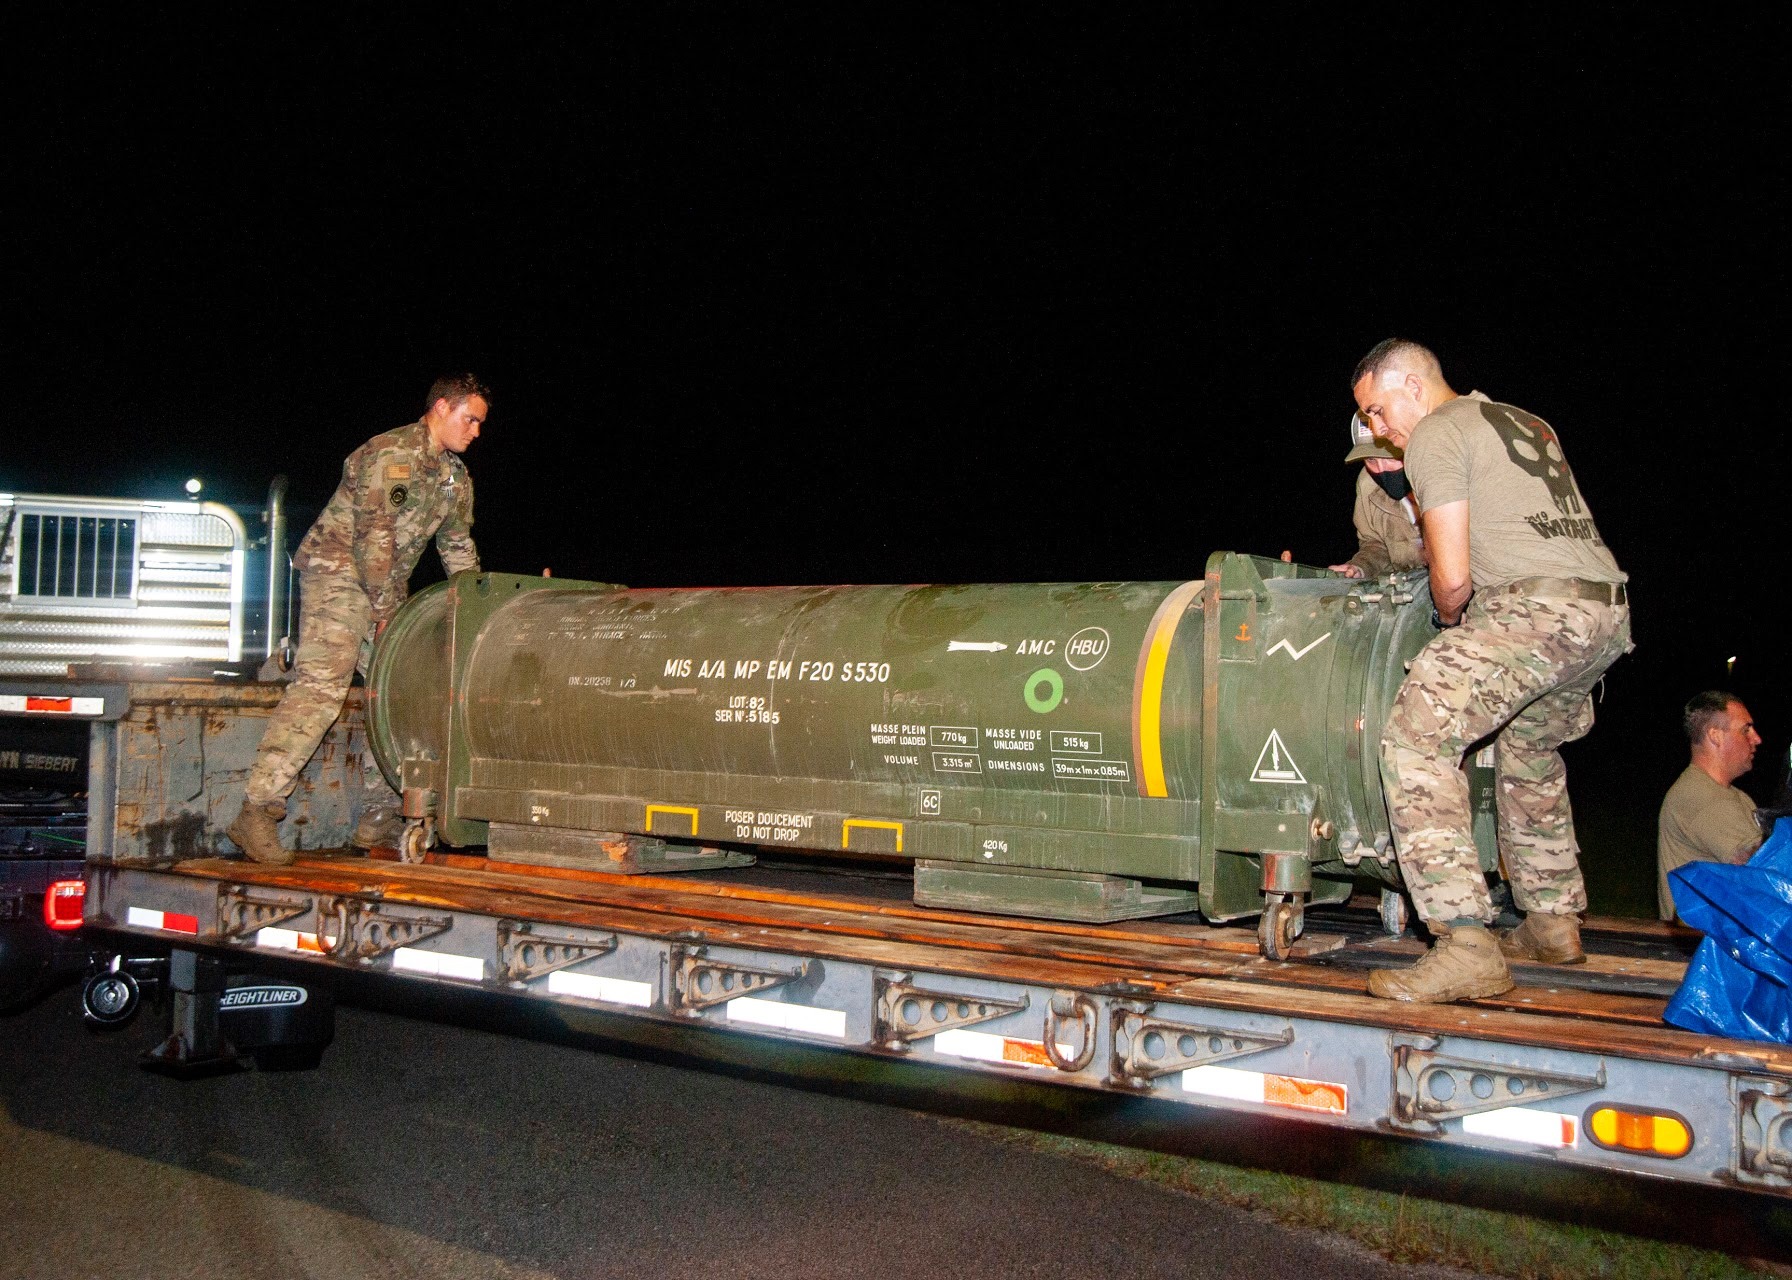 The missile was found at Lakeland Linder International Airport in Florida